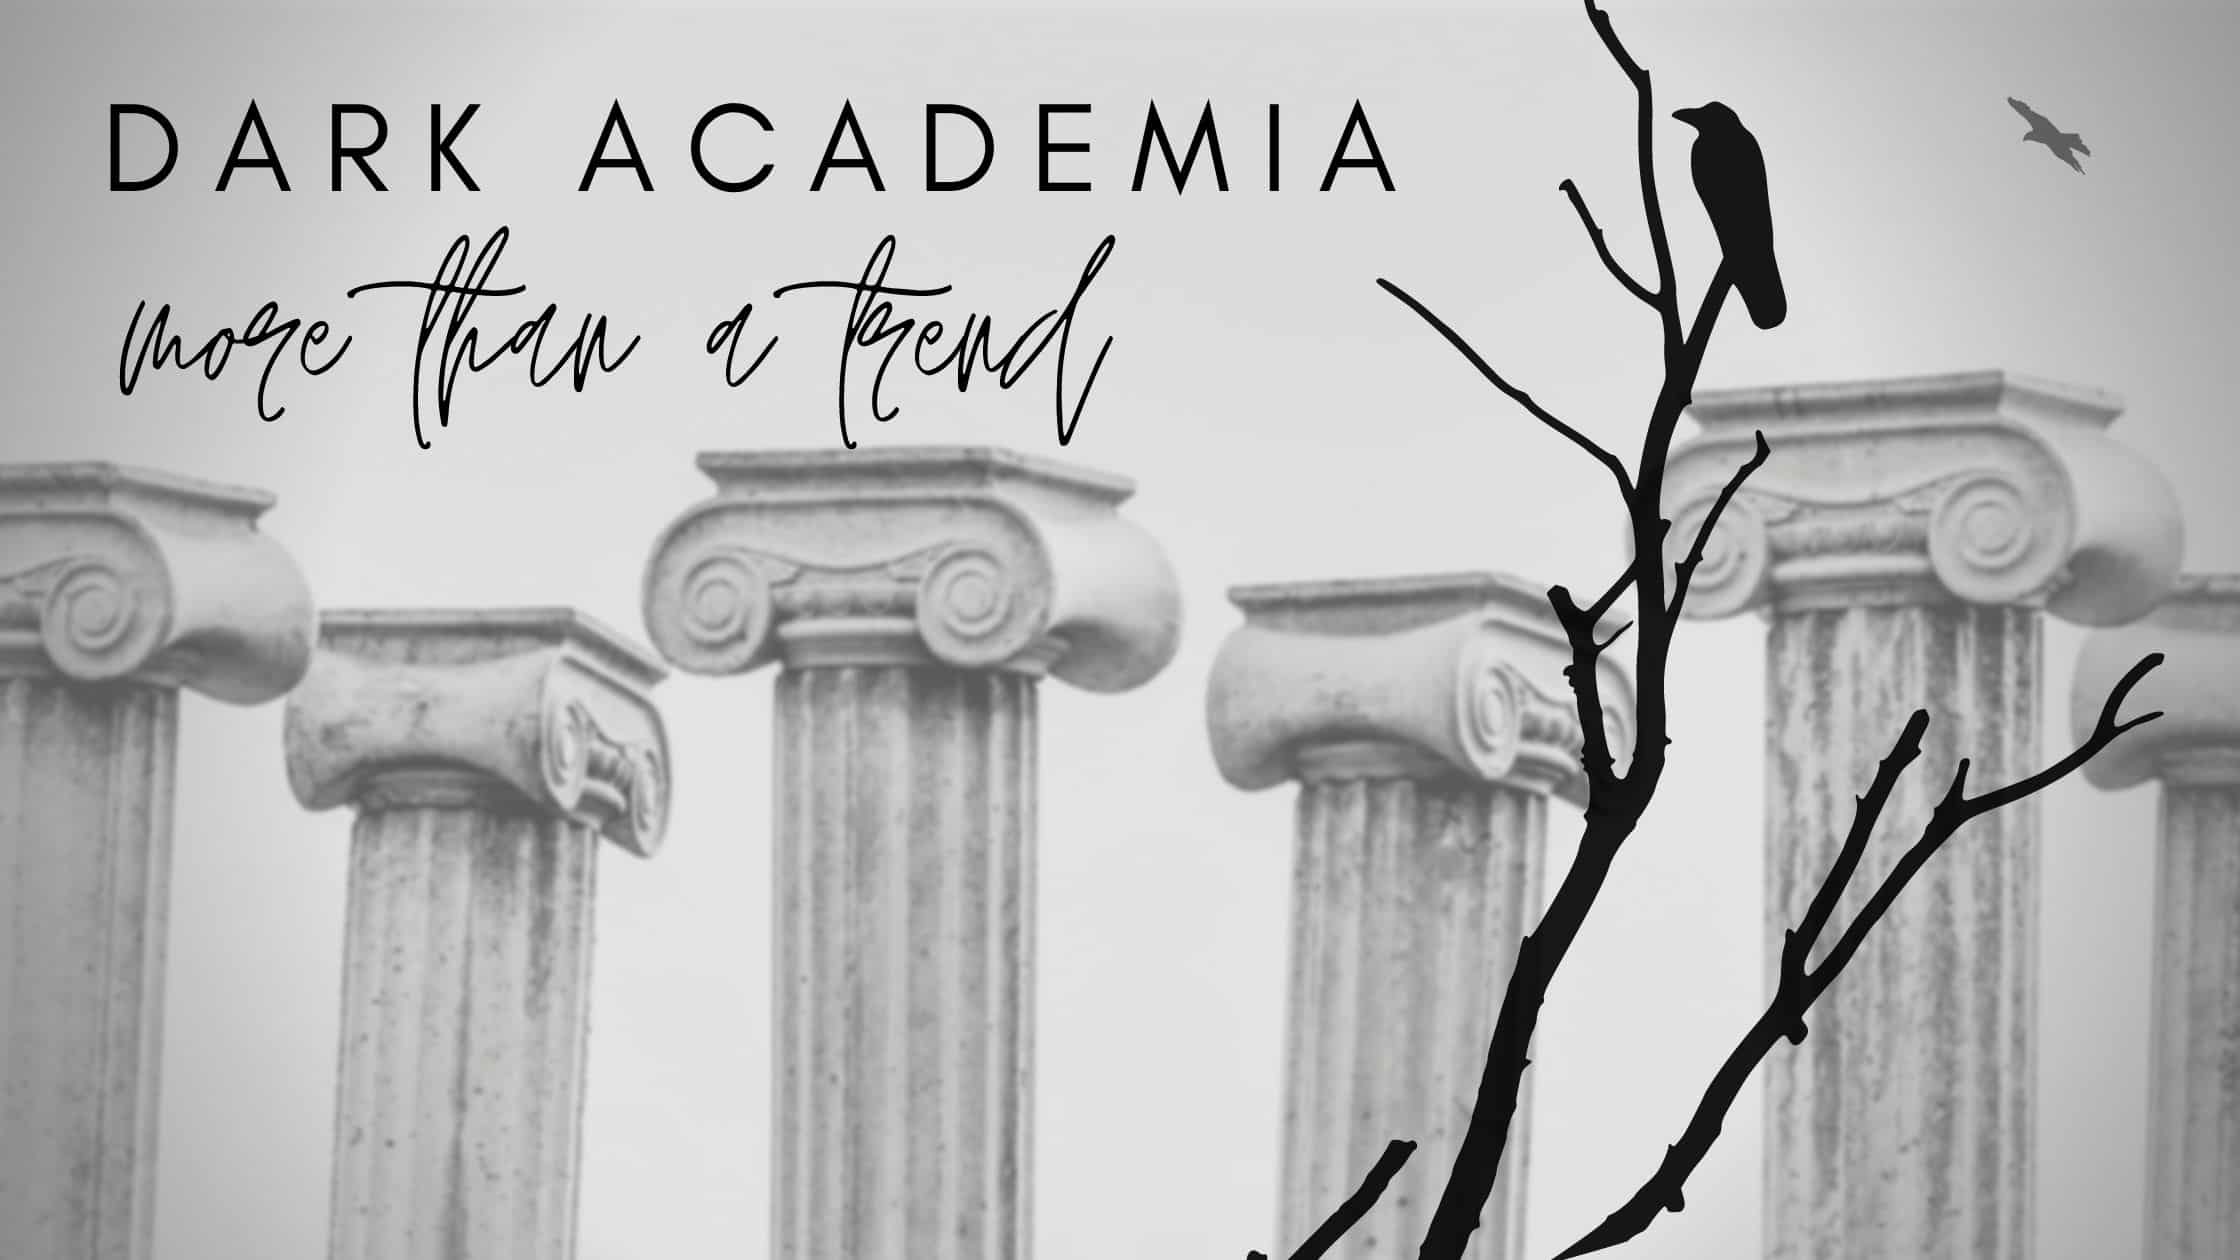 Dark academia aesthetic is more than a trend